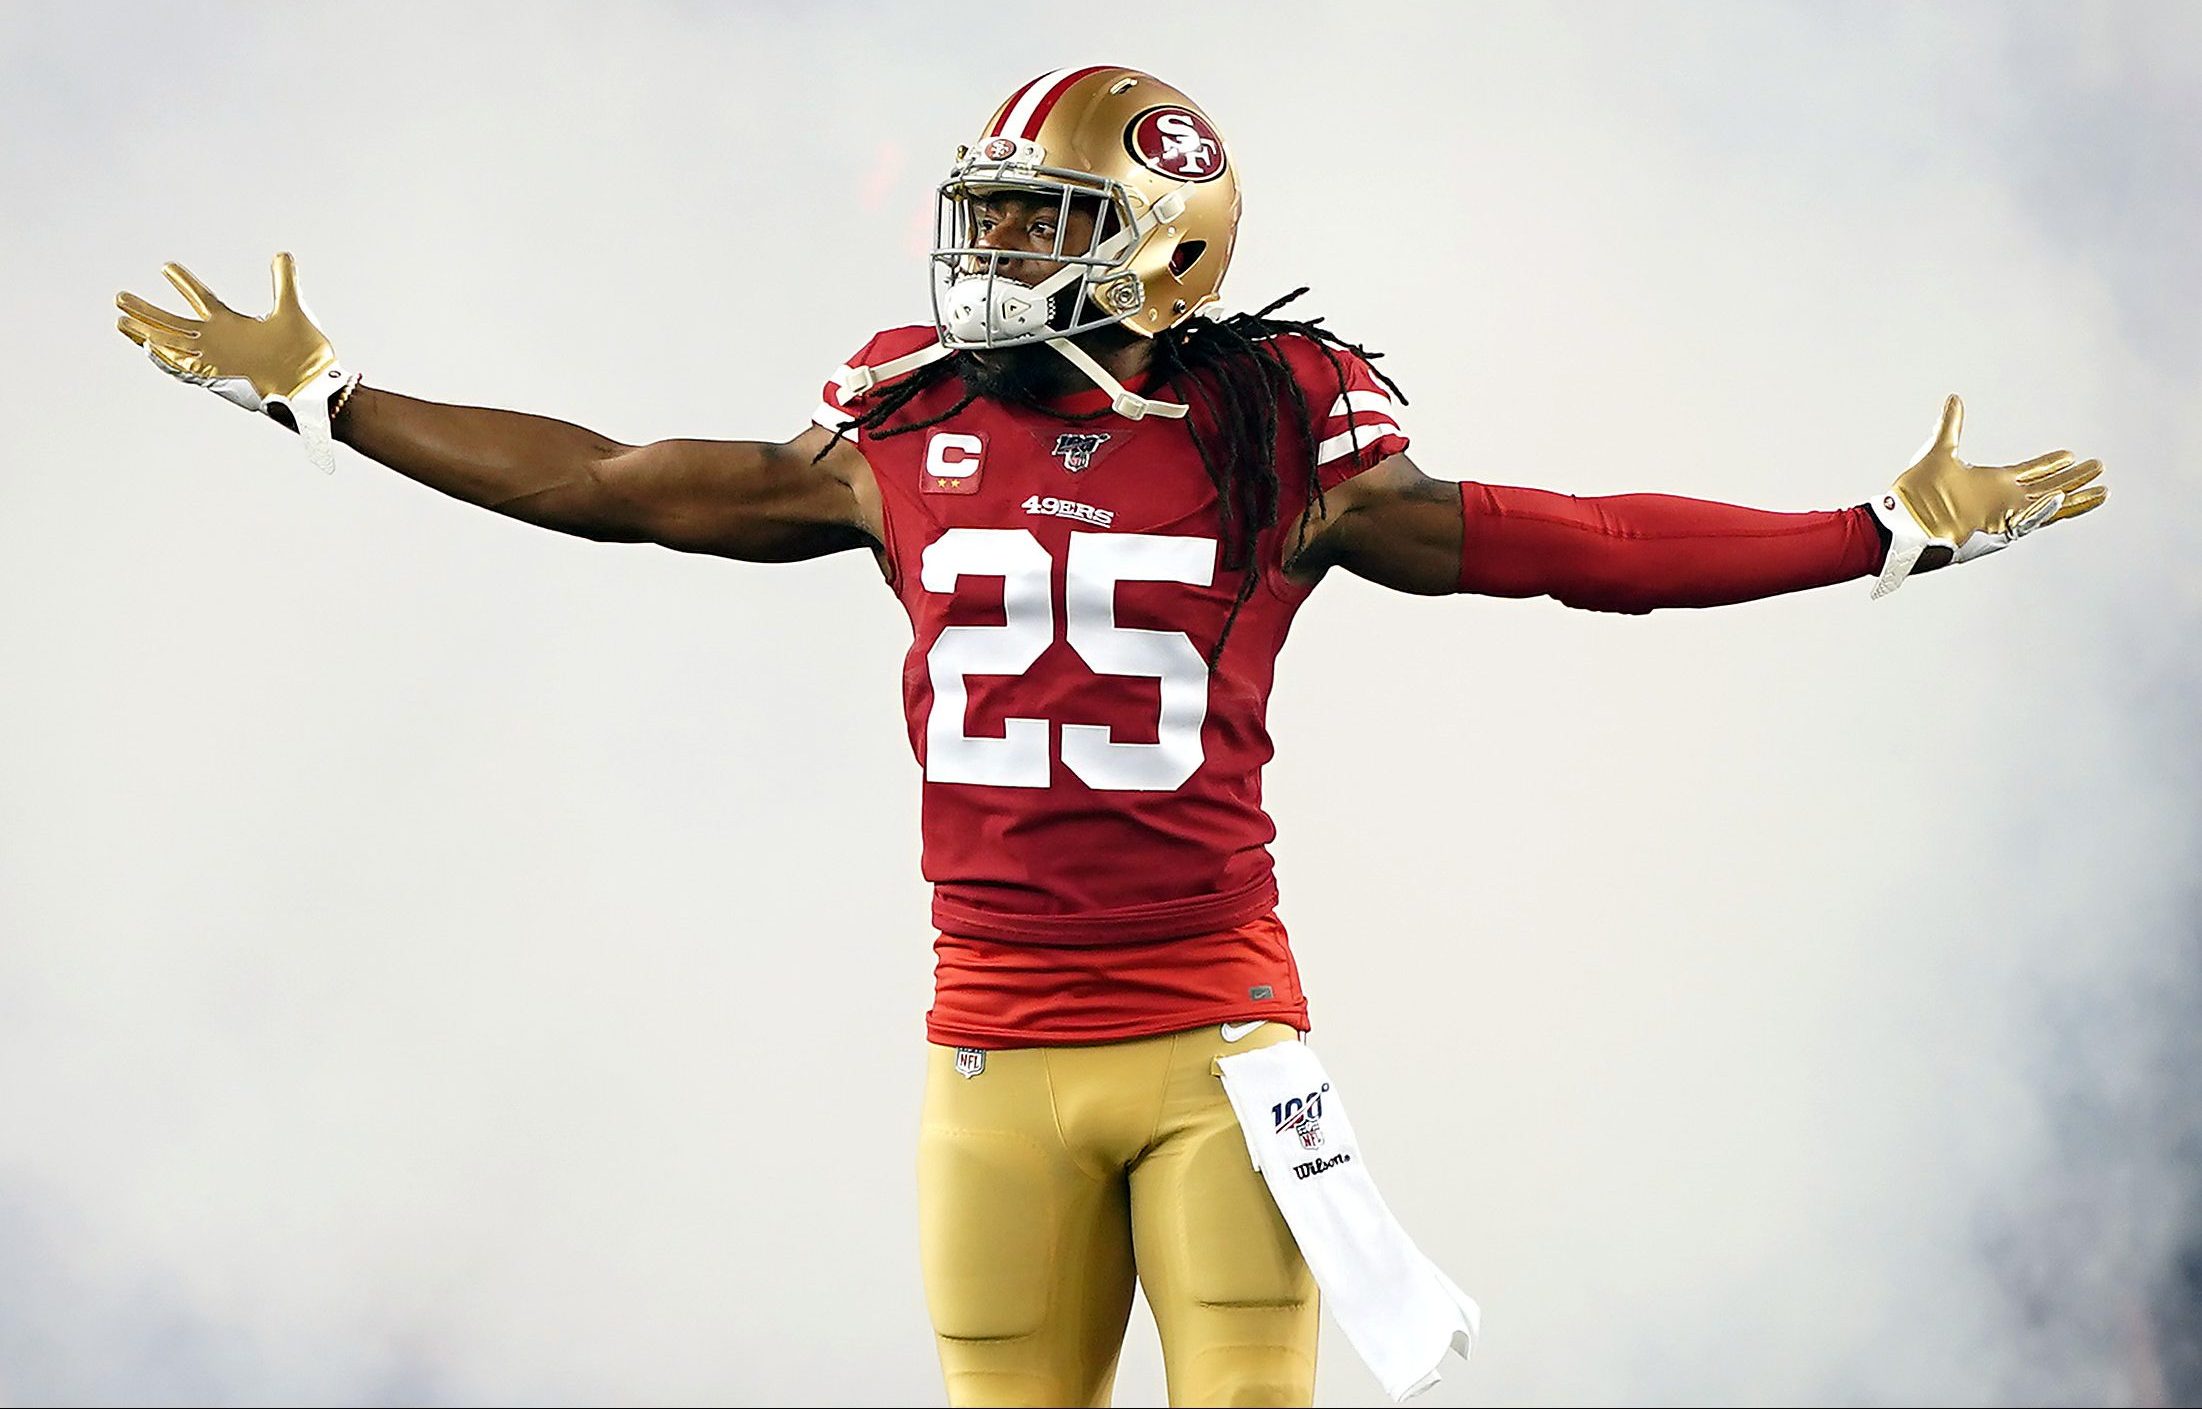 49ers traditional road jerseys